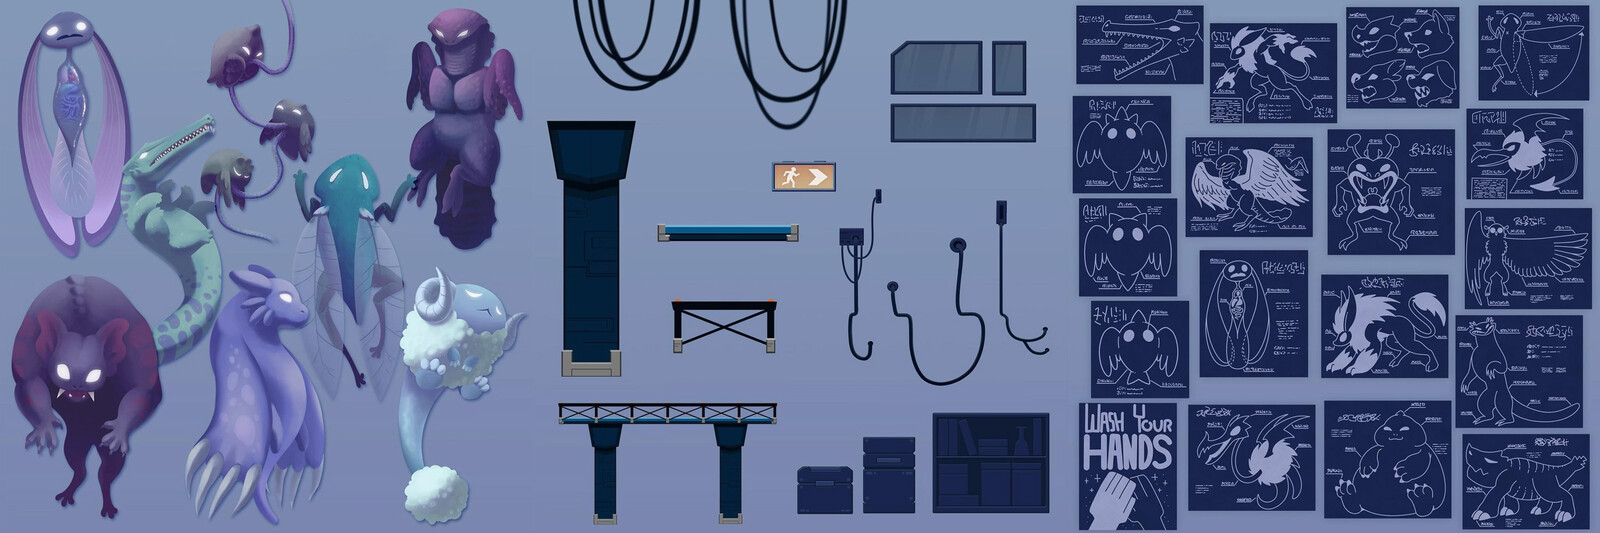 All the assets I made for the game 